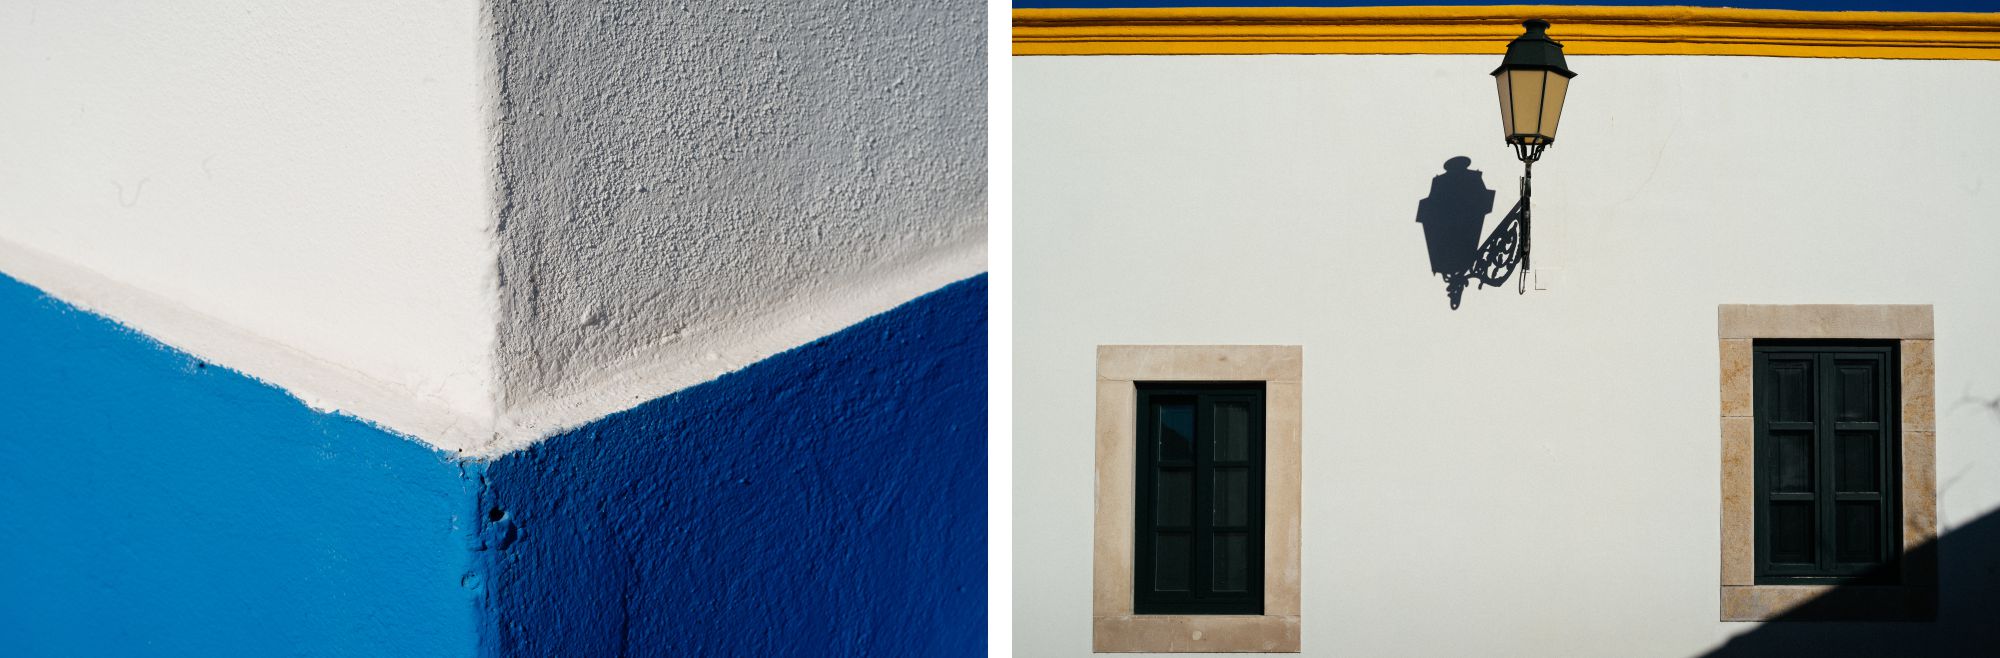 more minimal compositions